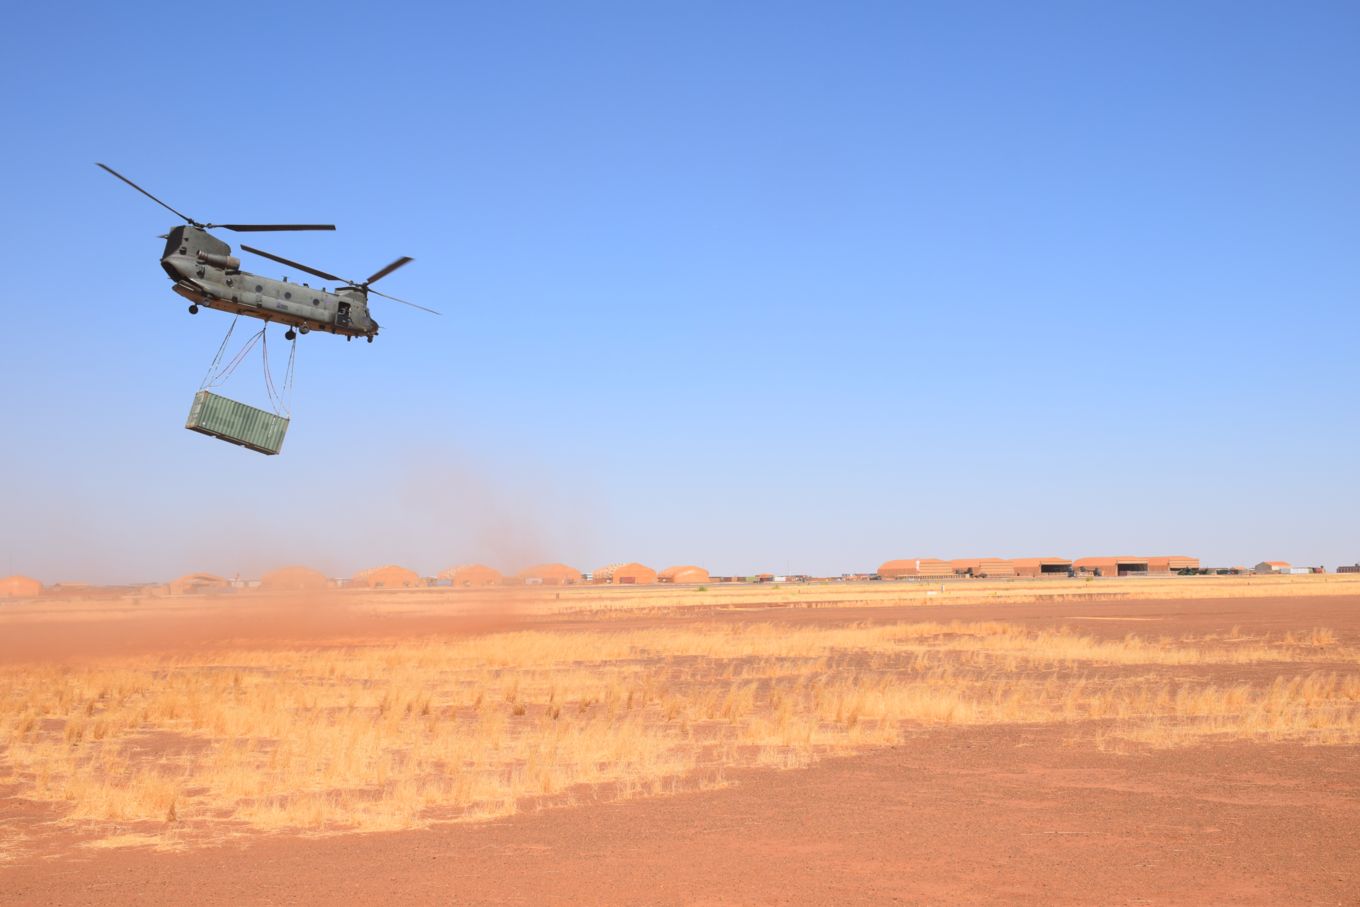 An RAF Chinook and 3 Joint Helicopter An RAF Chinook and 3 Joint Helicopter Support Squadron Personnel lifts a heavy ISO container in order to assist with French Op BARKHANE, Camp Roberts, Gao, Mali.